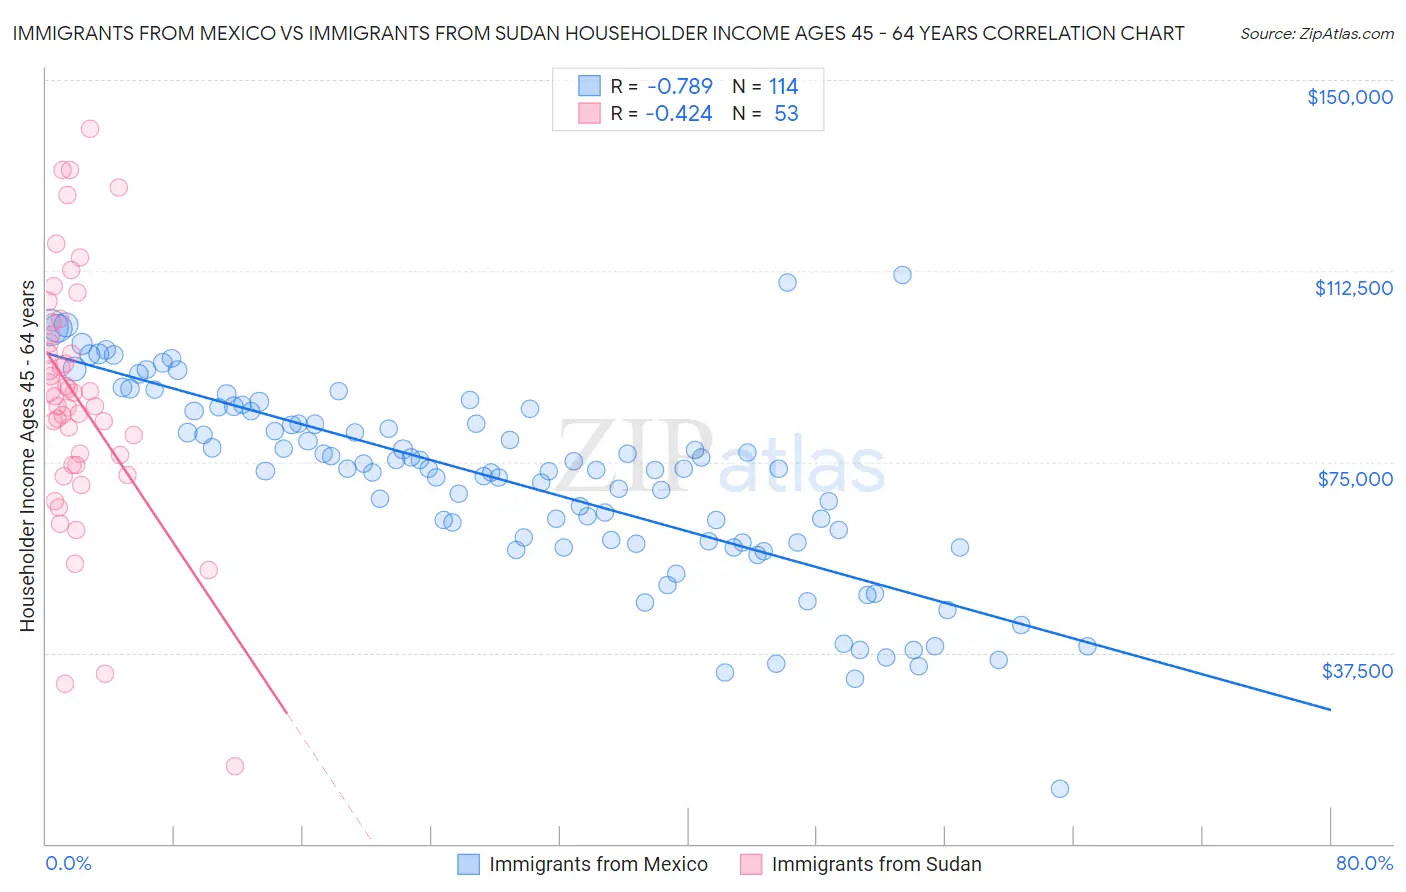 Immigrants from Mexico vs Immigrants from Sudan Householder Income Ages 45 - 64 years